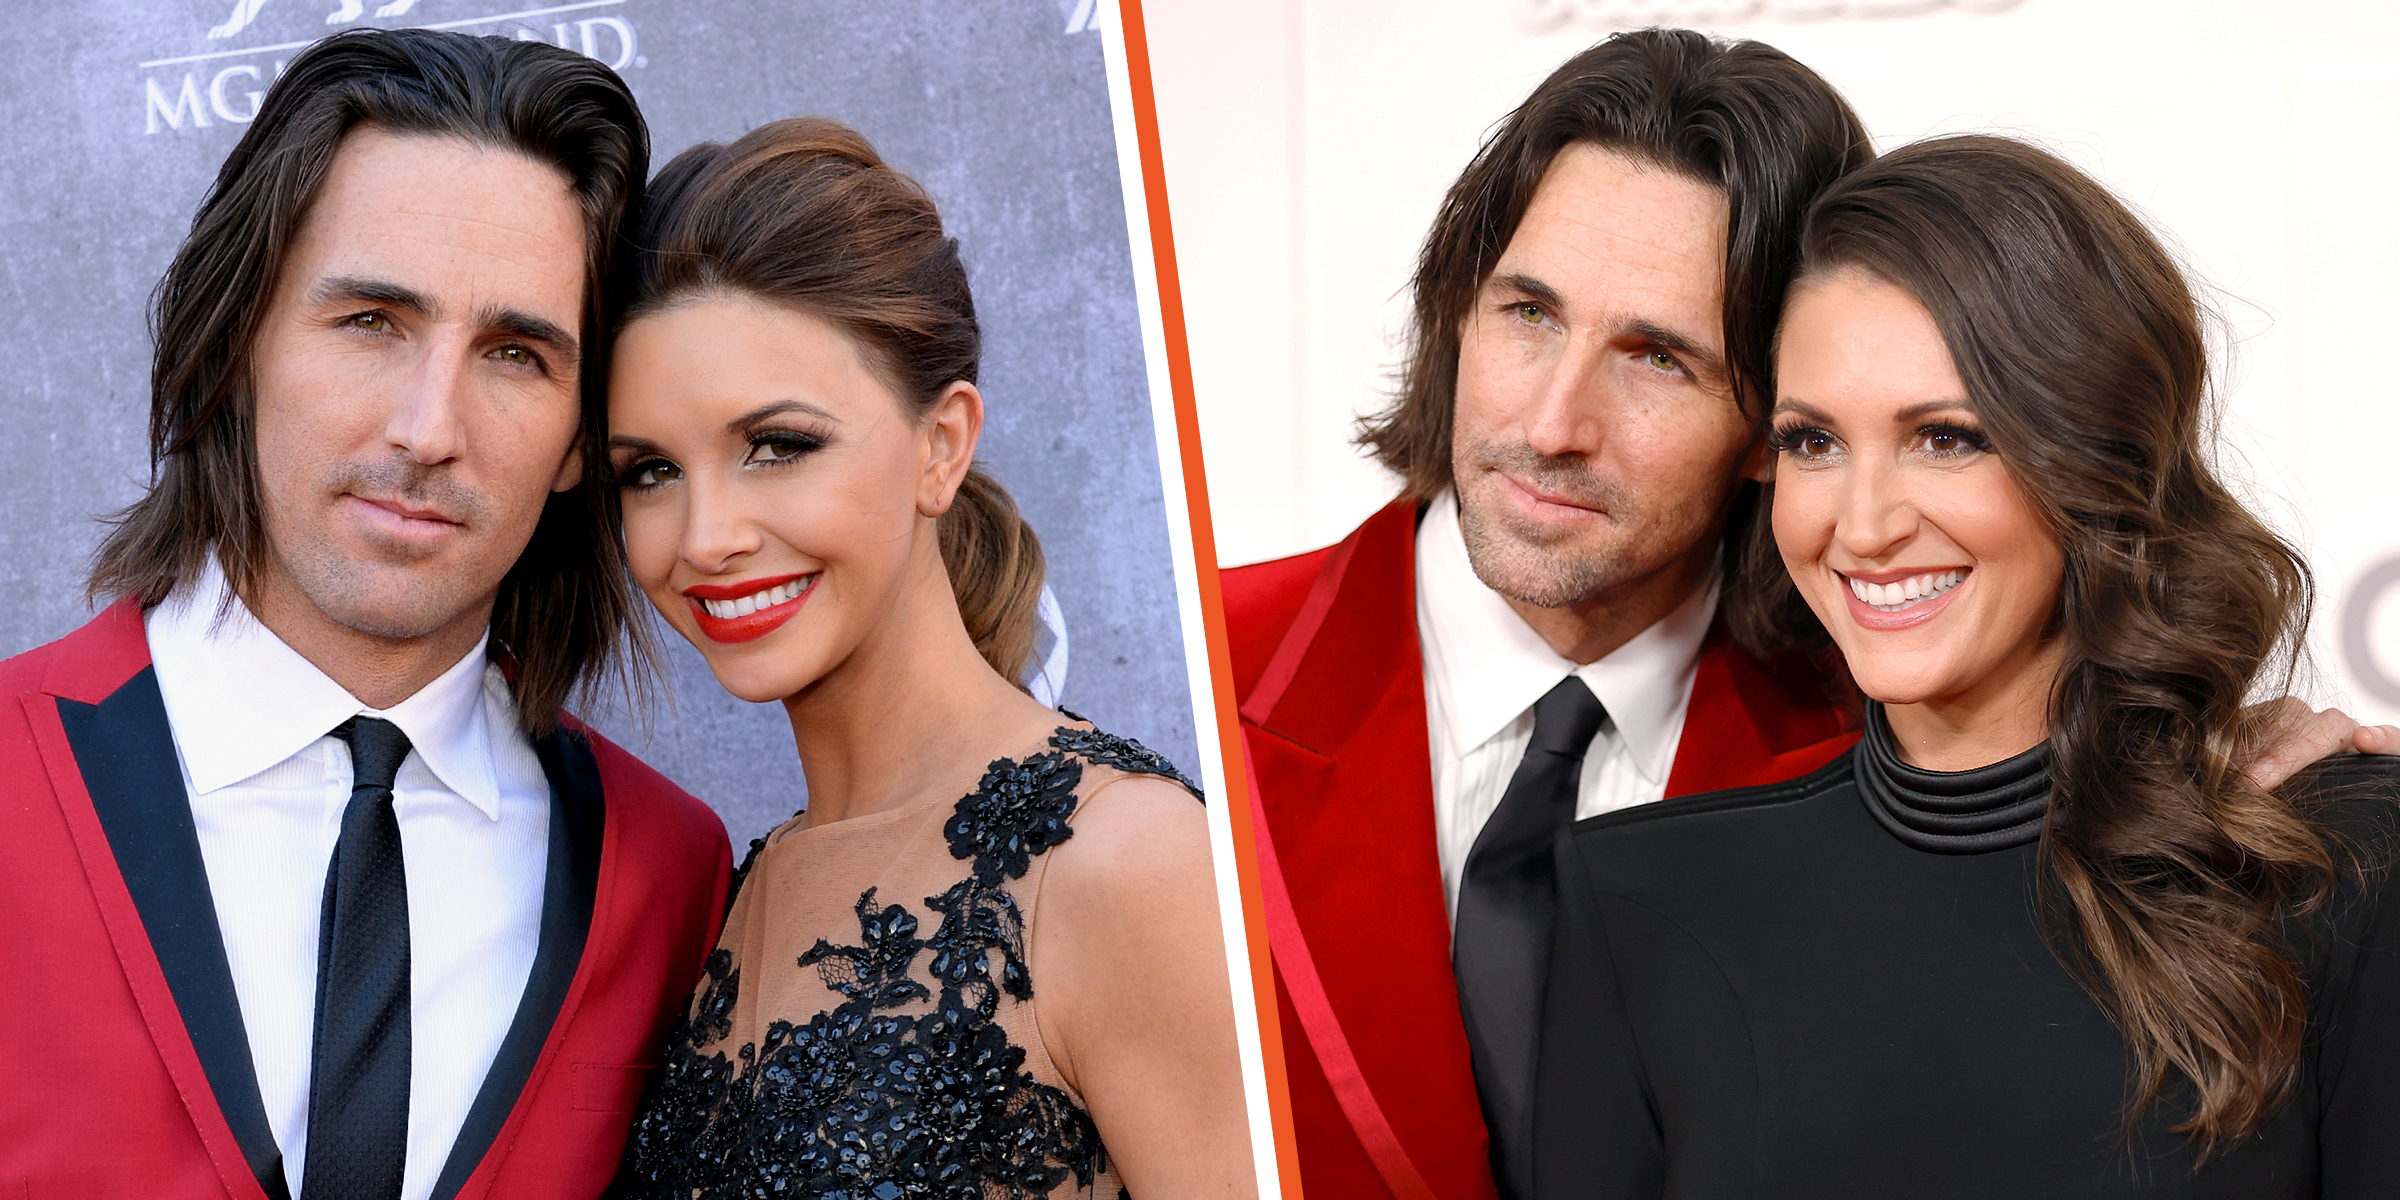 Jake Owen and Lacey Buchanan | Jake Owen and Erica Hartlein | Source: Getty Images